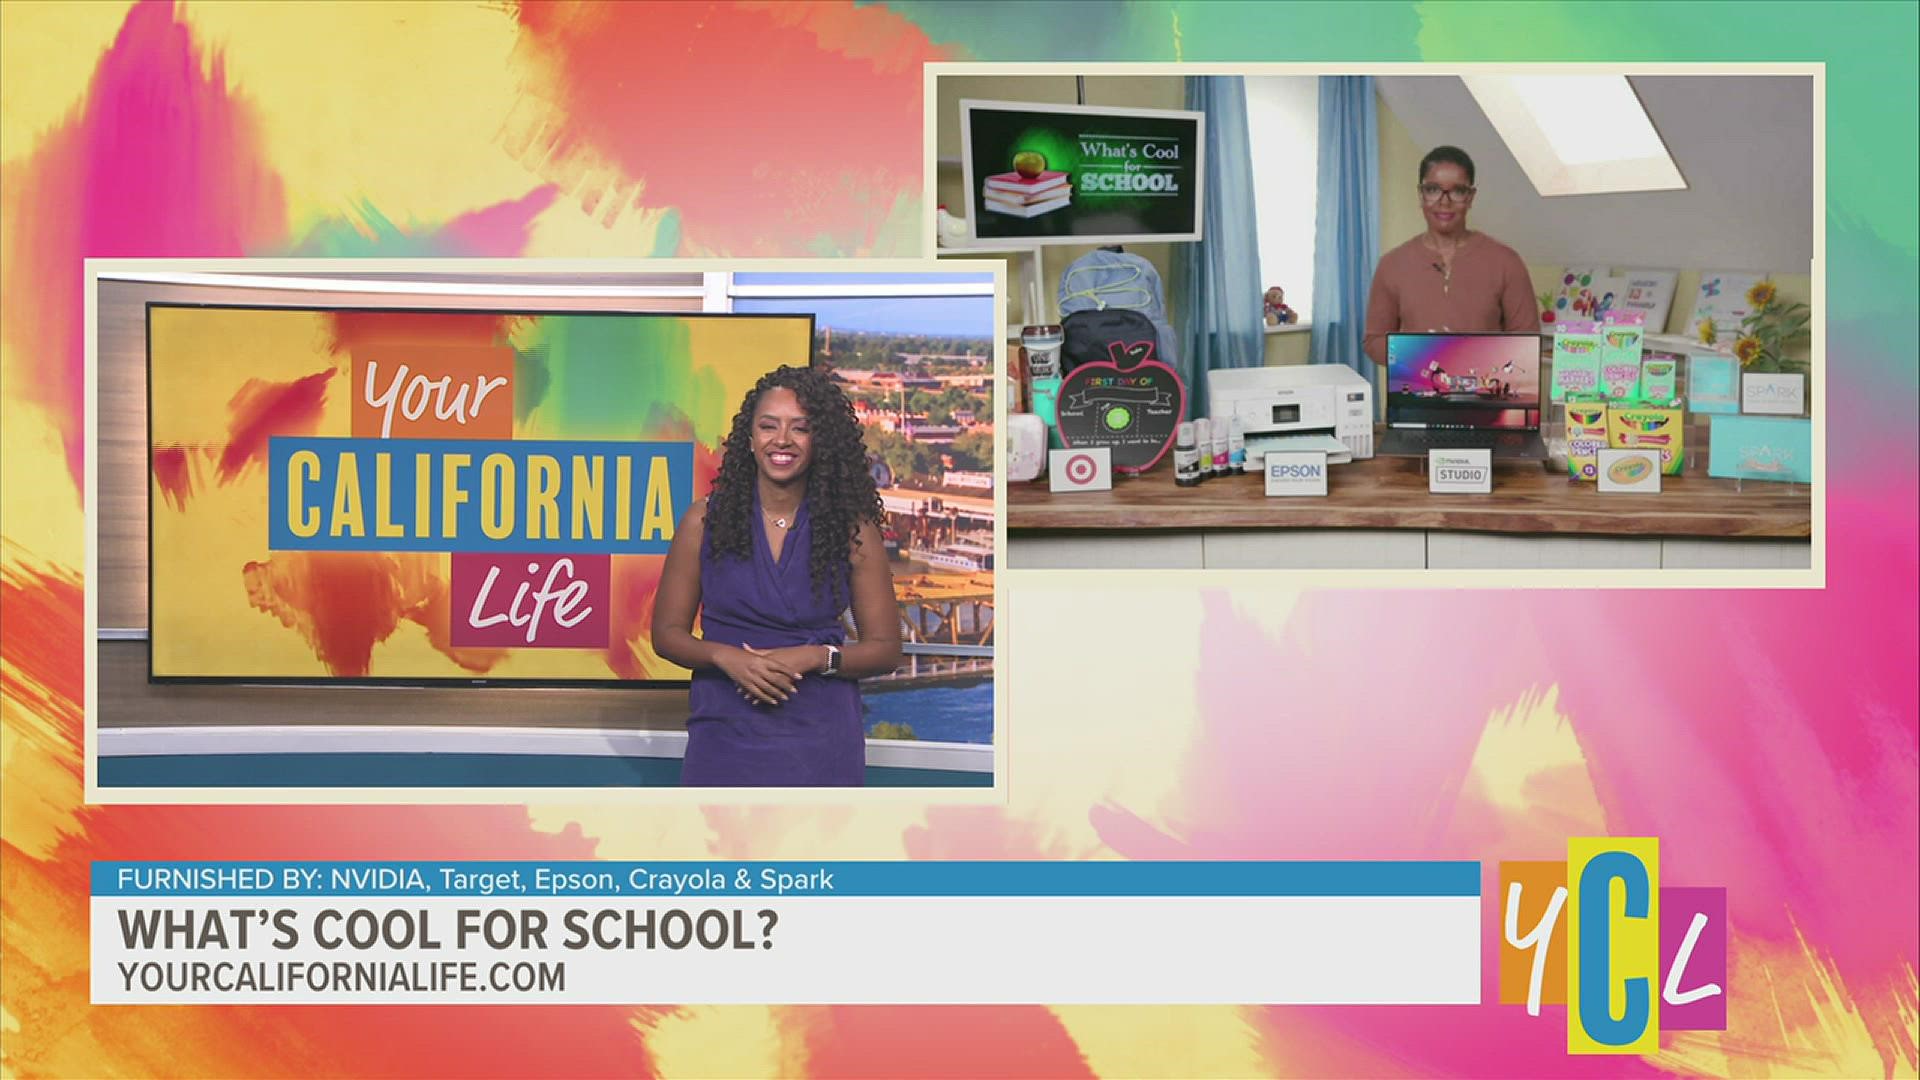 It's time for students to head back to school but are you ready? If not, don't worry! A tech life expert shares what's cool for school to make life easier.